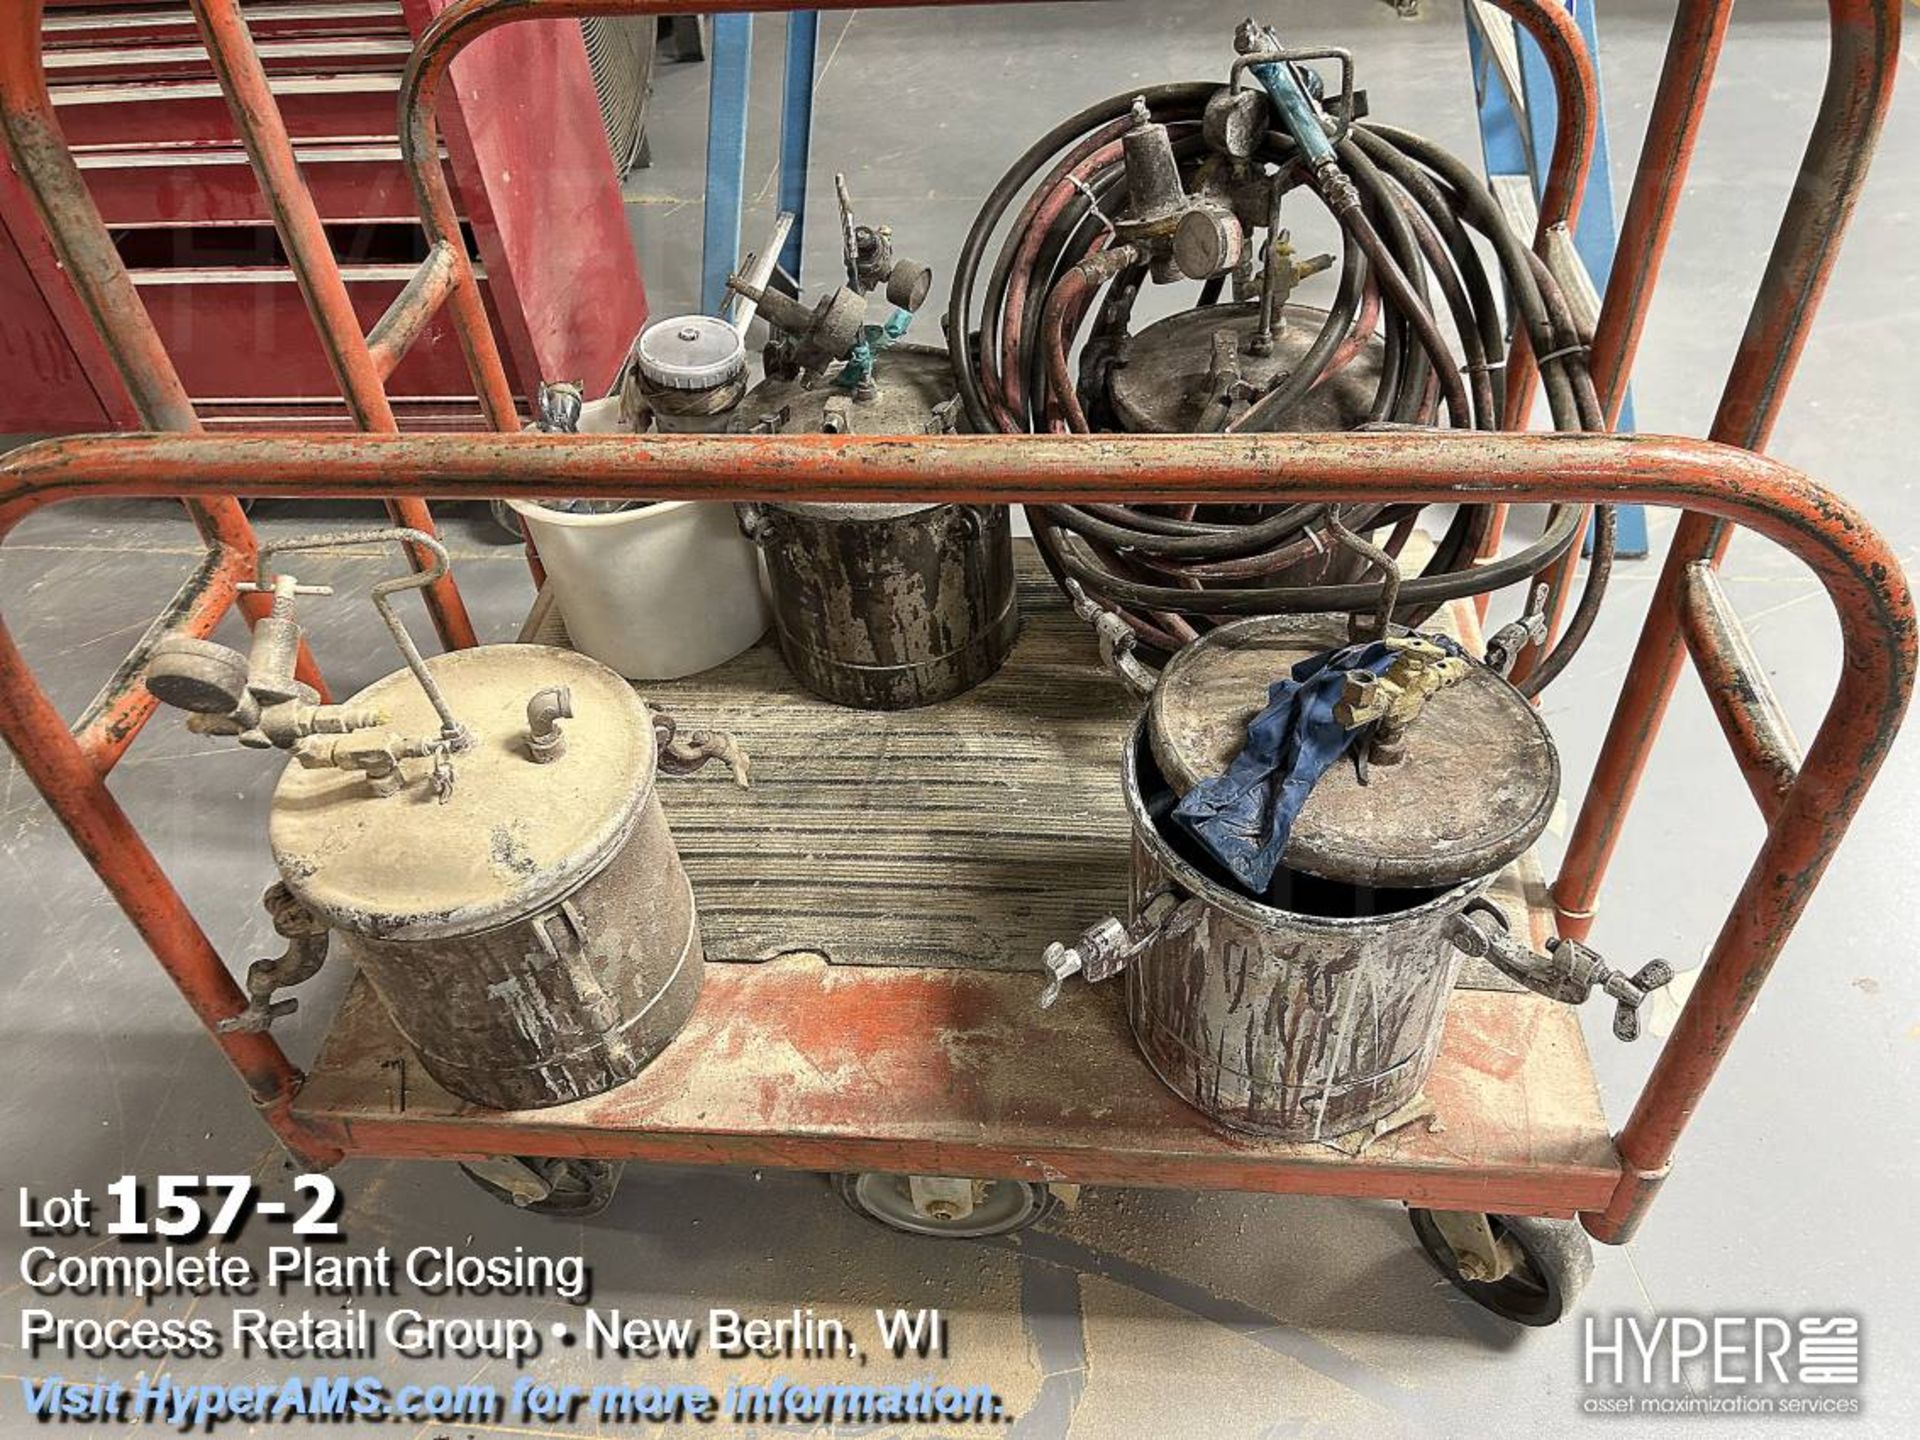 FMI stock cart with paint pots and spray guns - Image 2 of 3